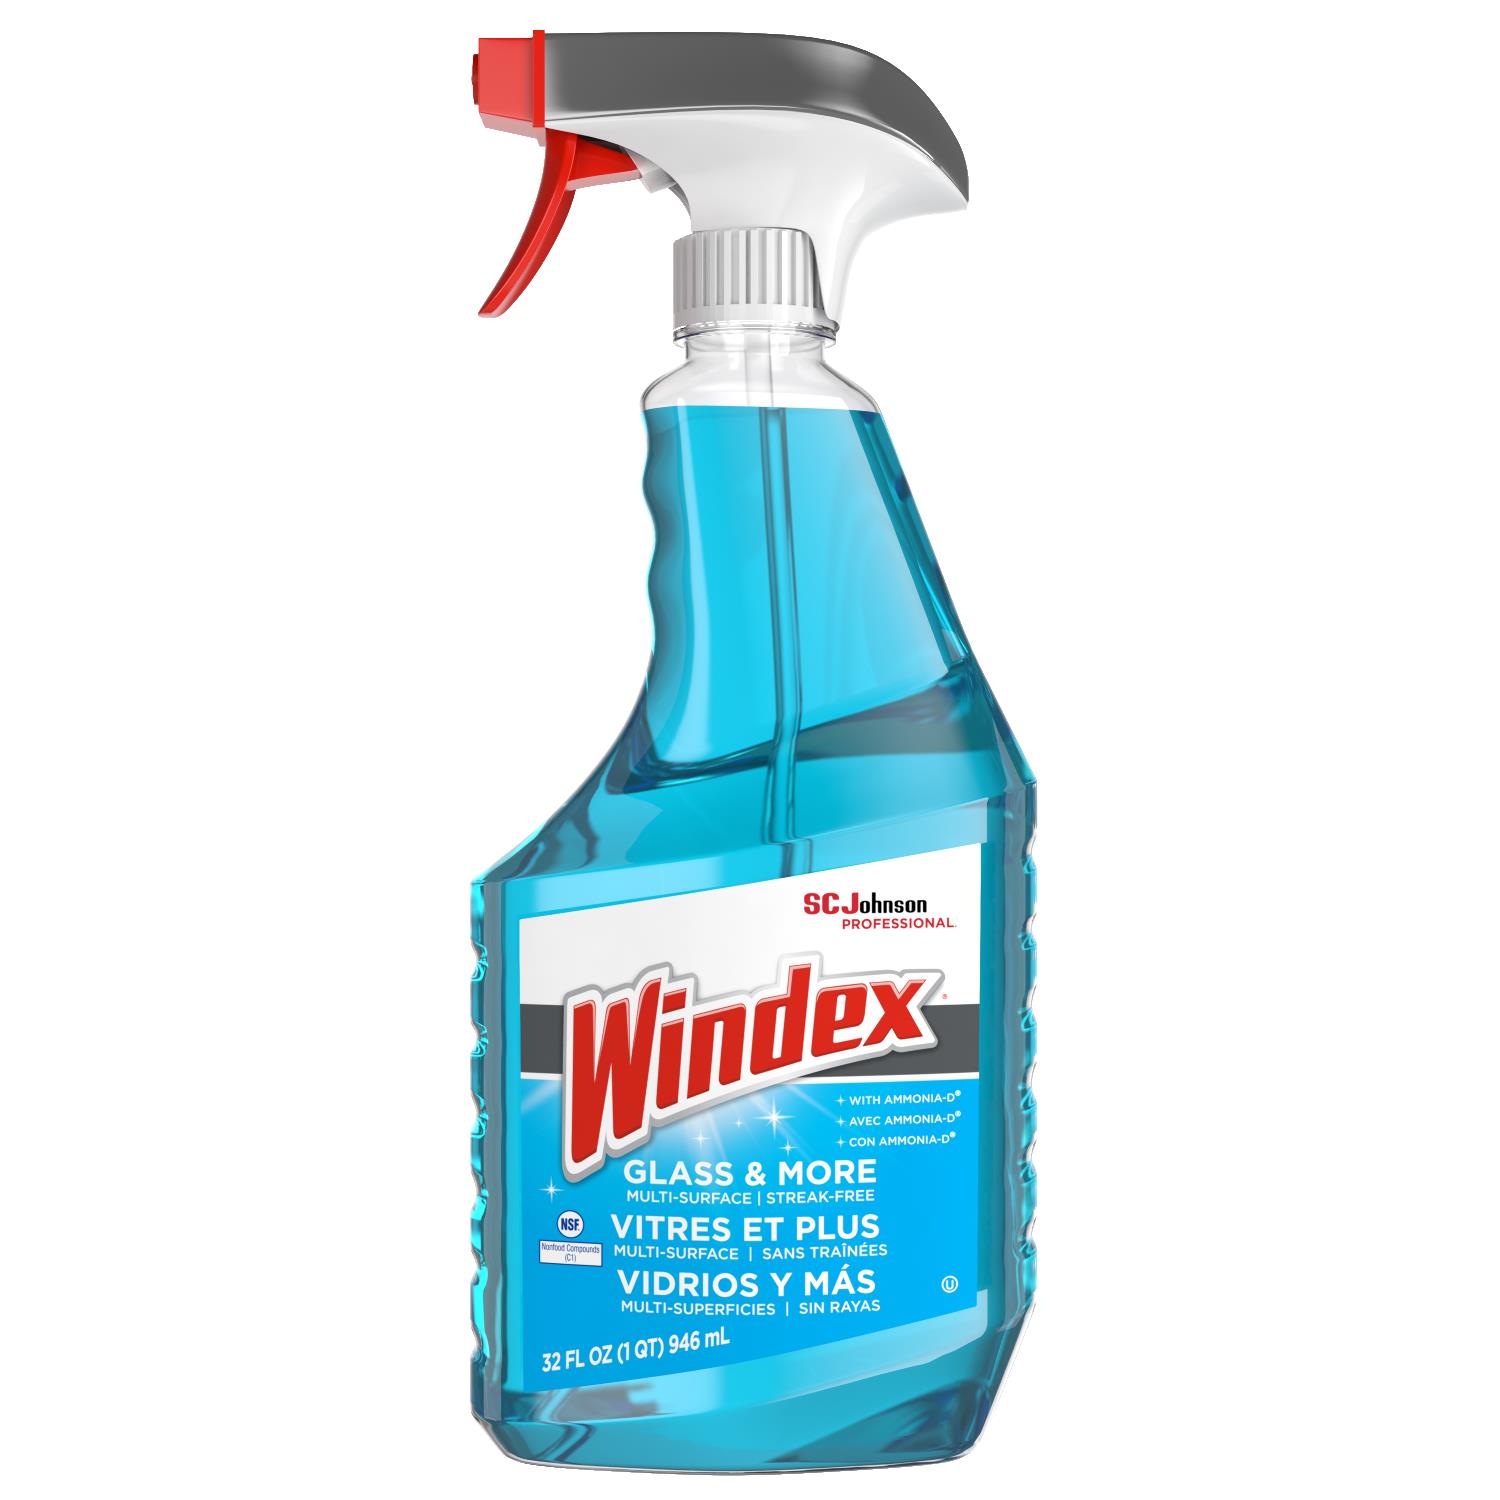 Windex® Glass & More Multi-Surface 946 ml Trigger - 8/Case